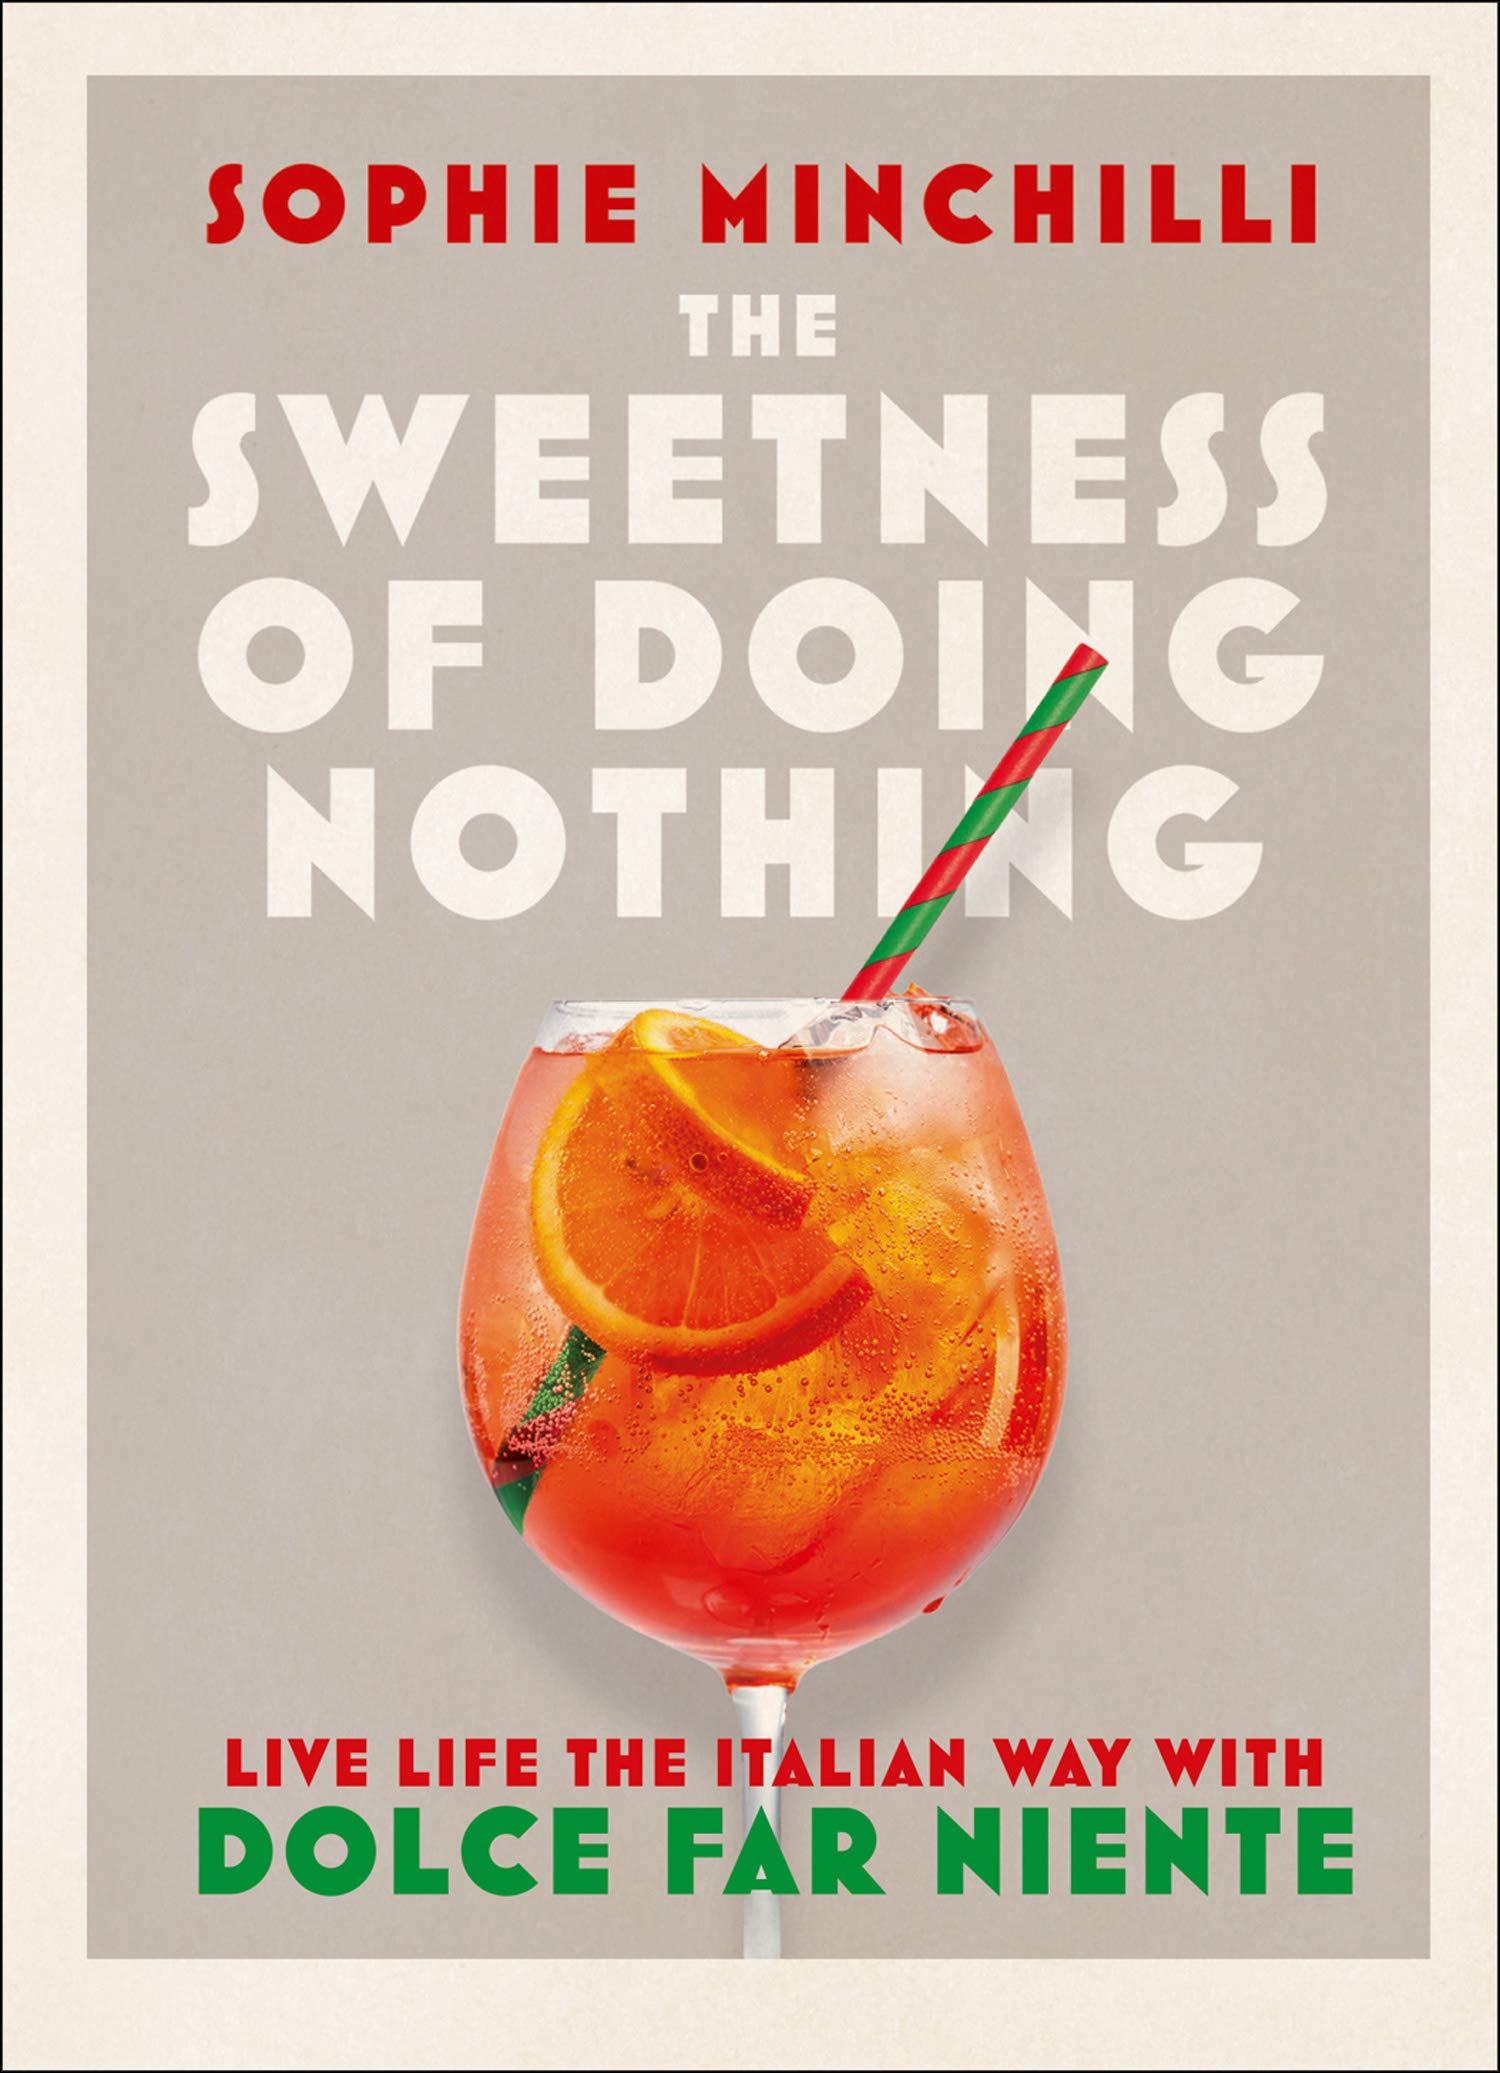 The Sweetness of Doing Nothing | Sophie Minchilli